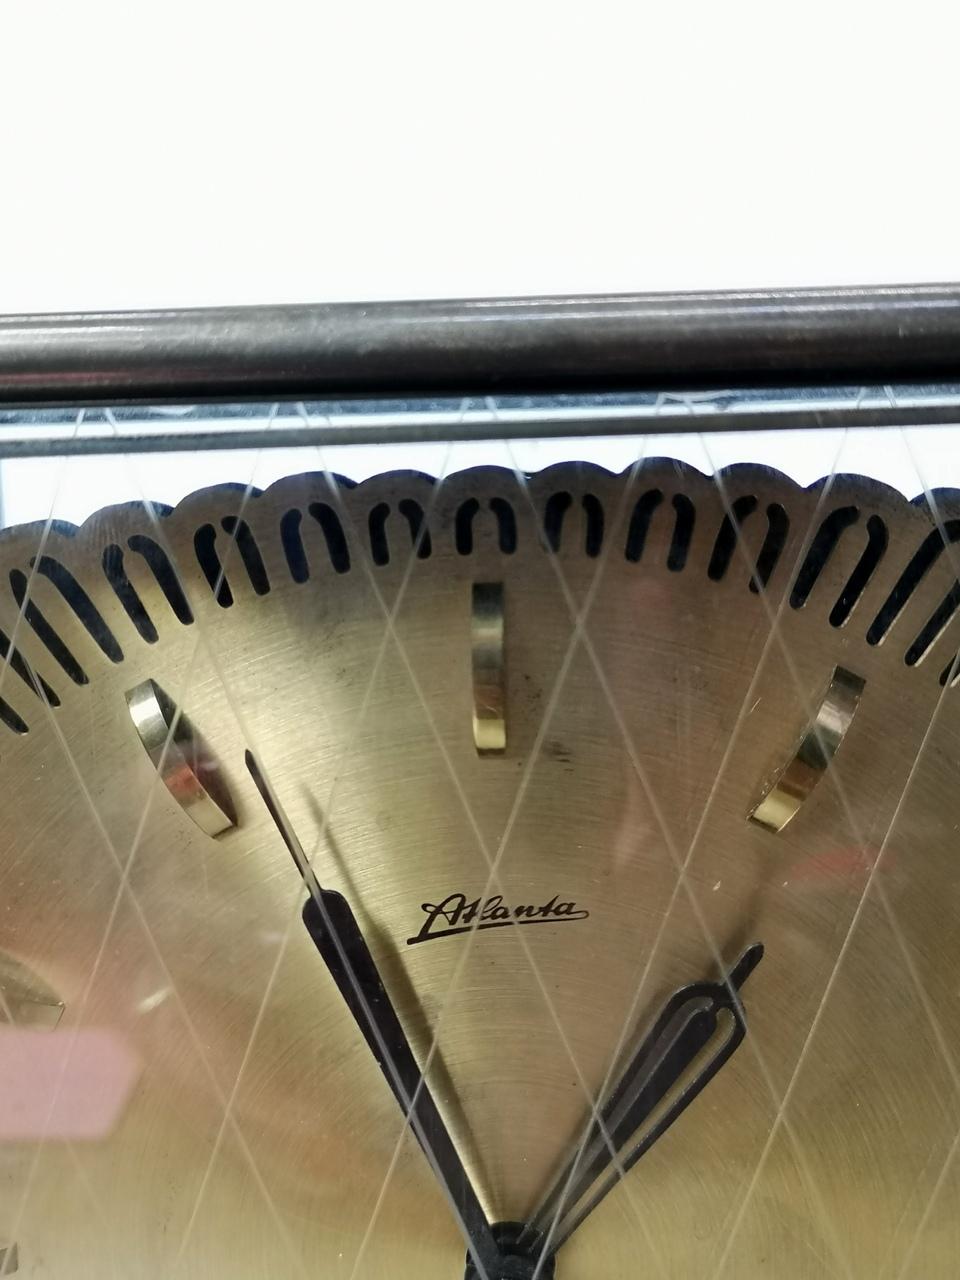 Mid-Century Modern Table Clock, by Atlanta, 1950s For Sale 10